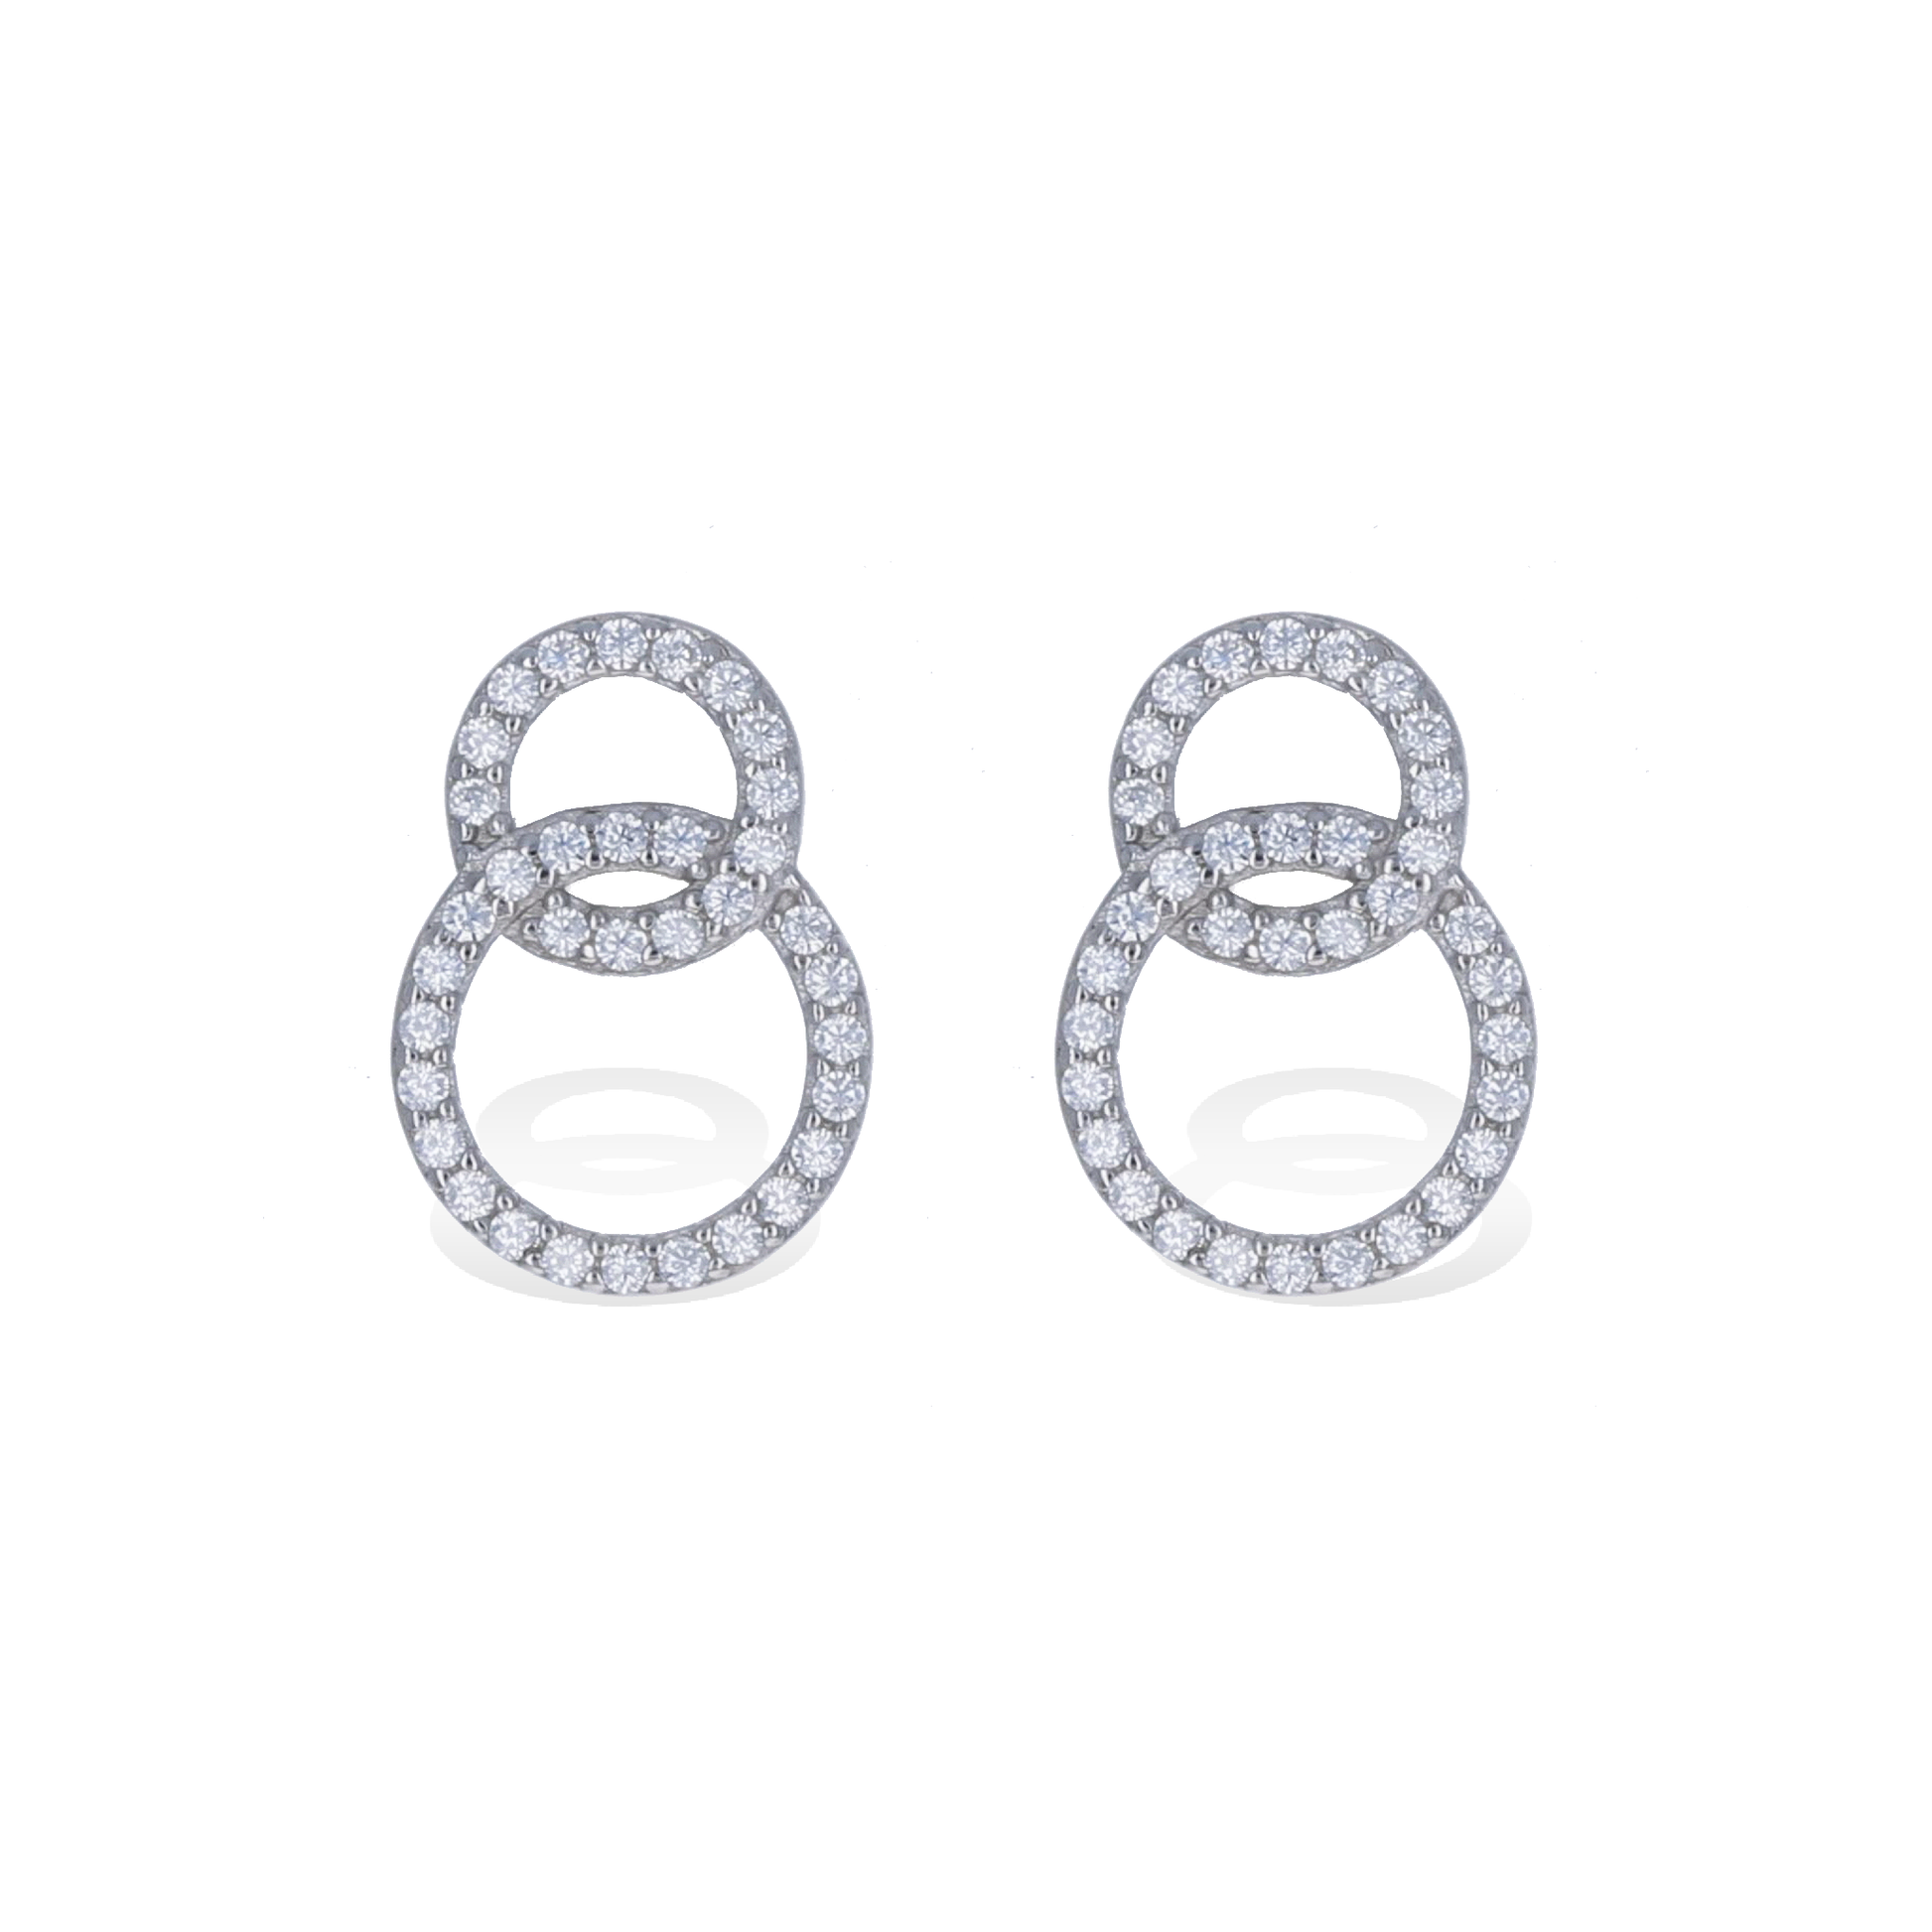 Sterling Silver Connected Circle Stud Earrings - Alexandra Marks Jewelry